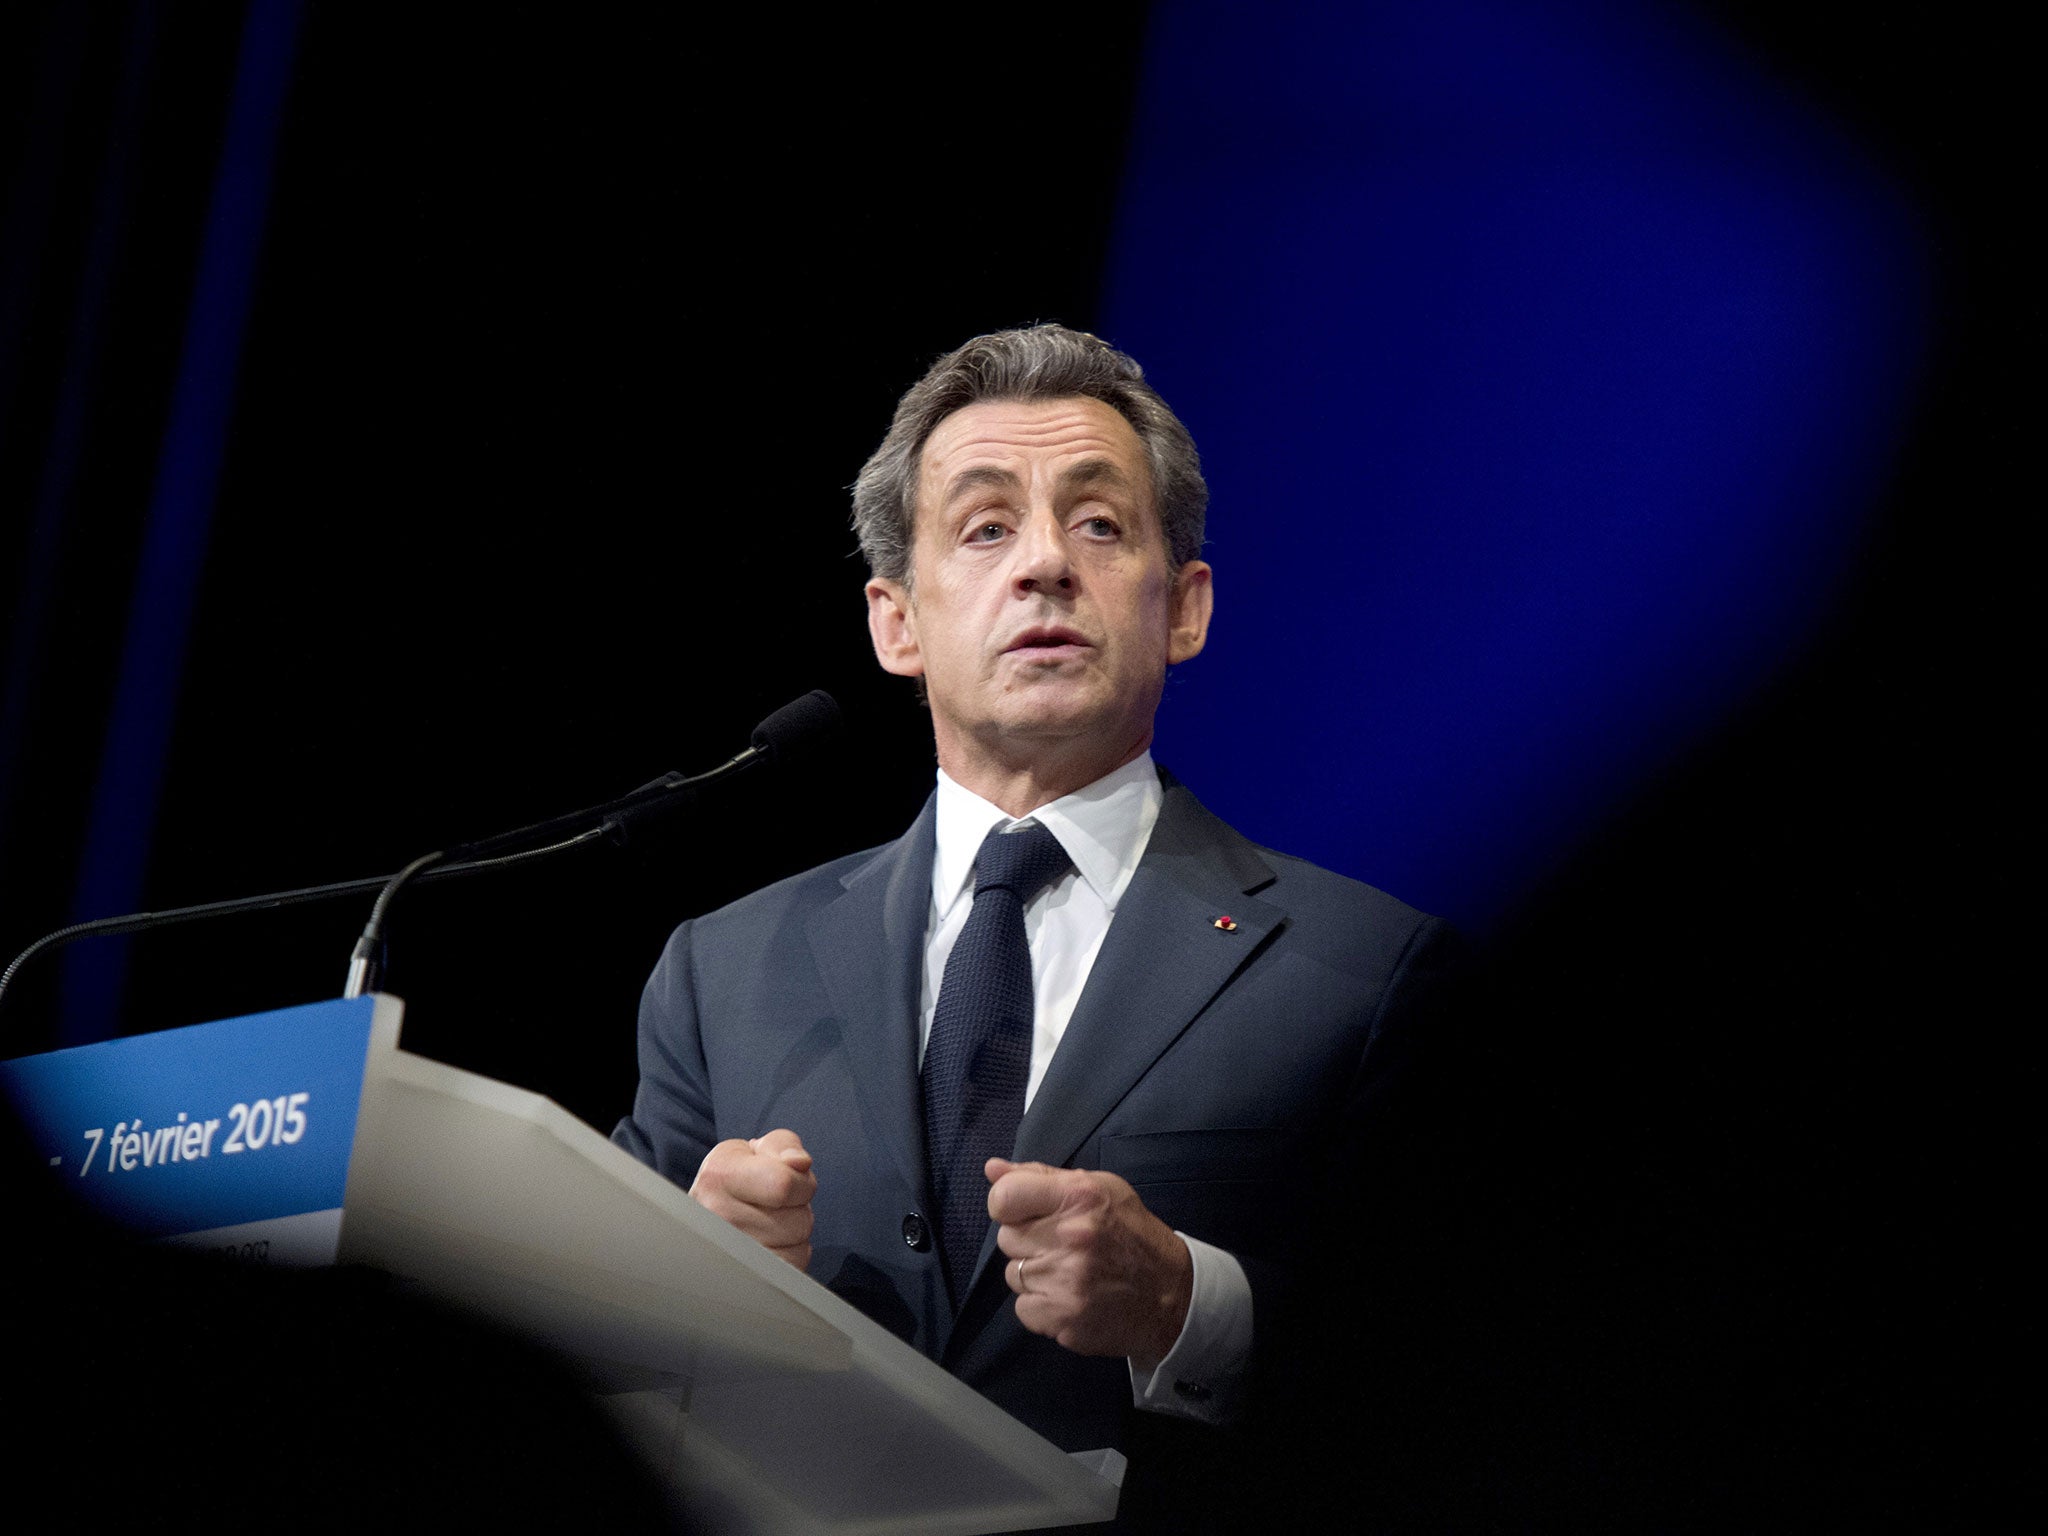 The presence of FN in councils is a problem for Sarkozy